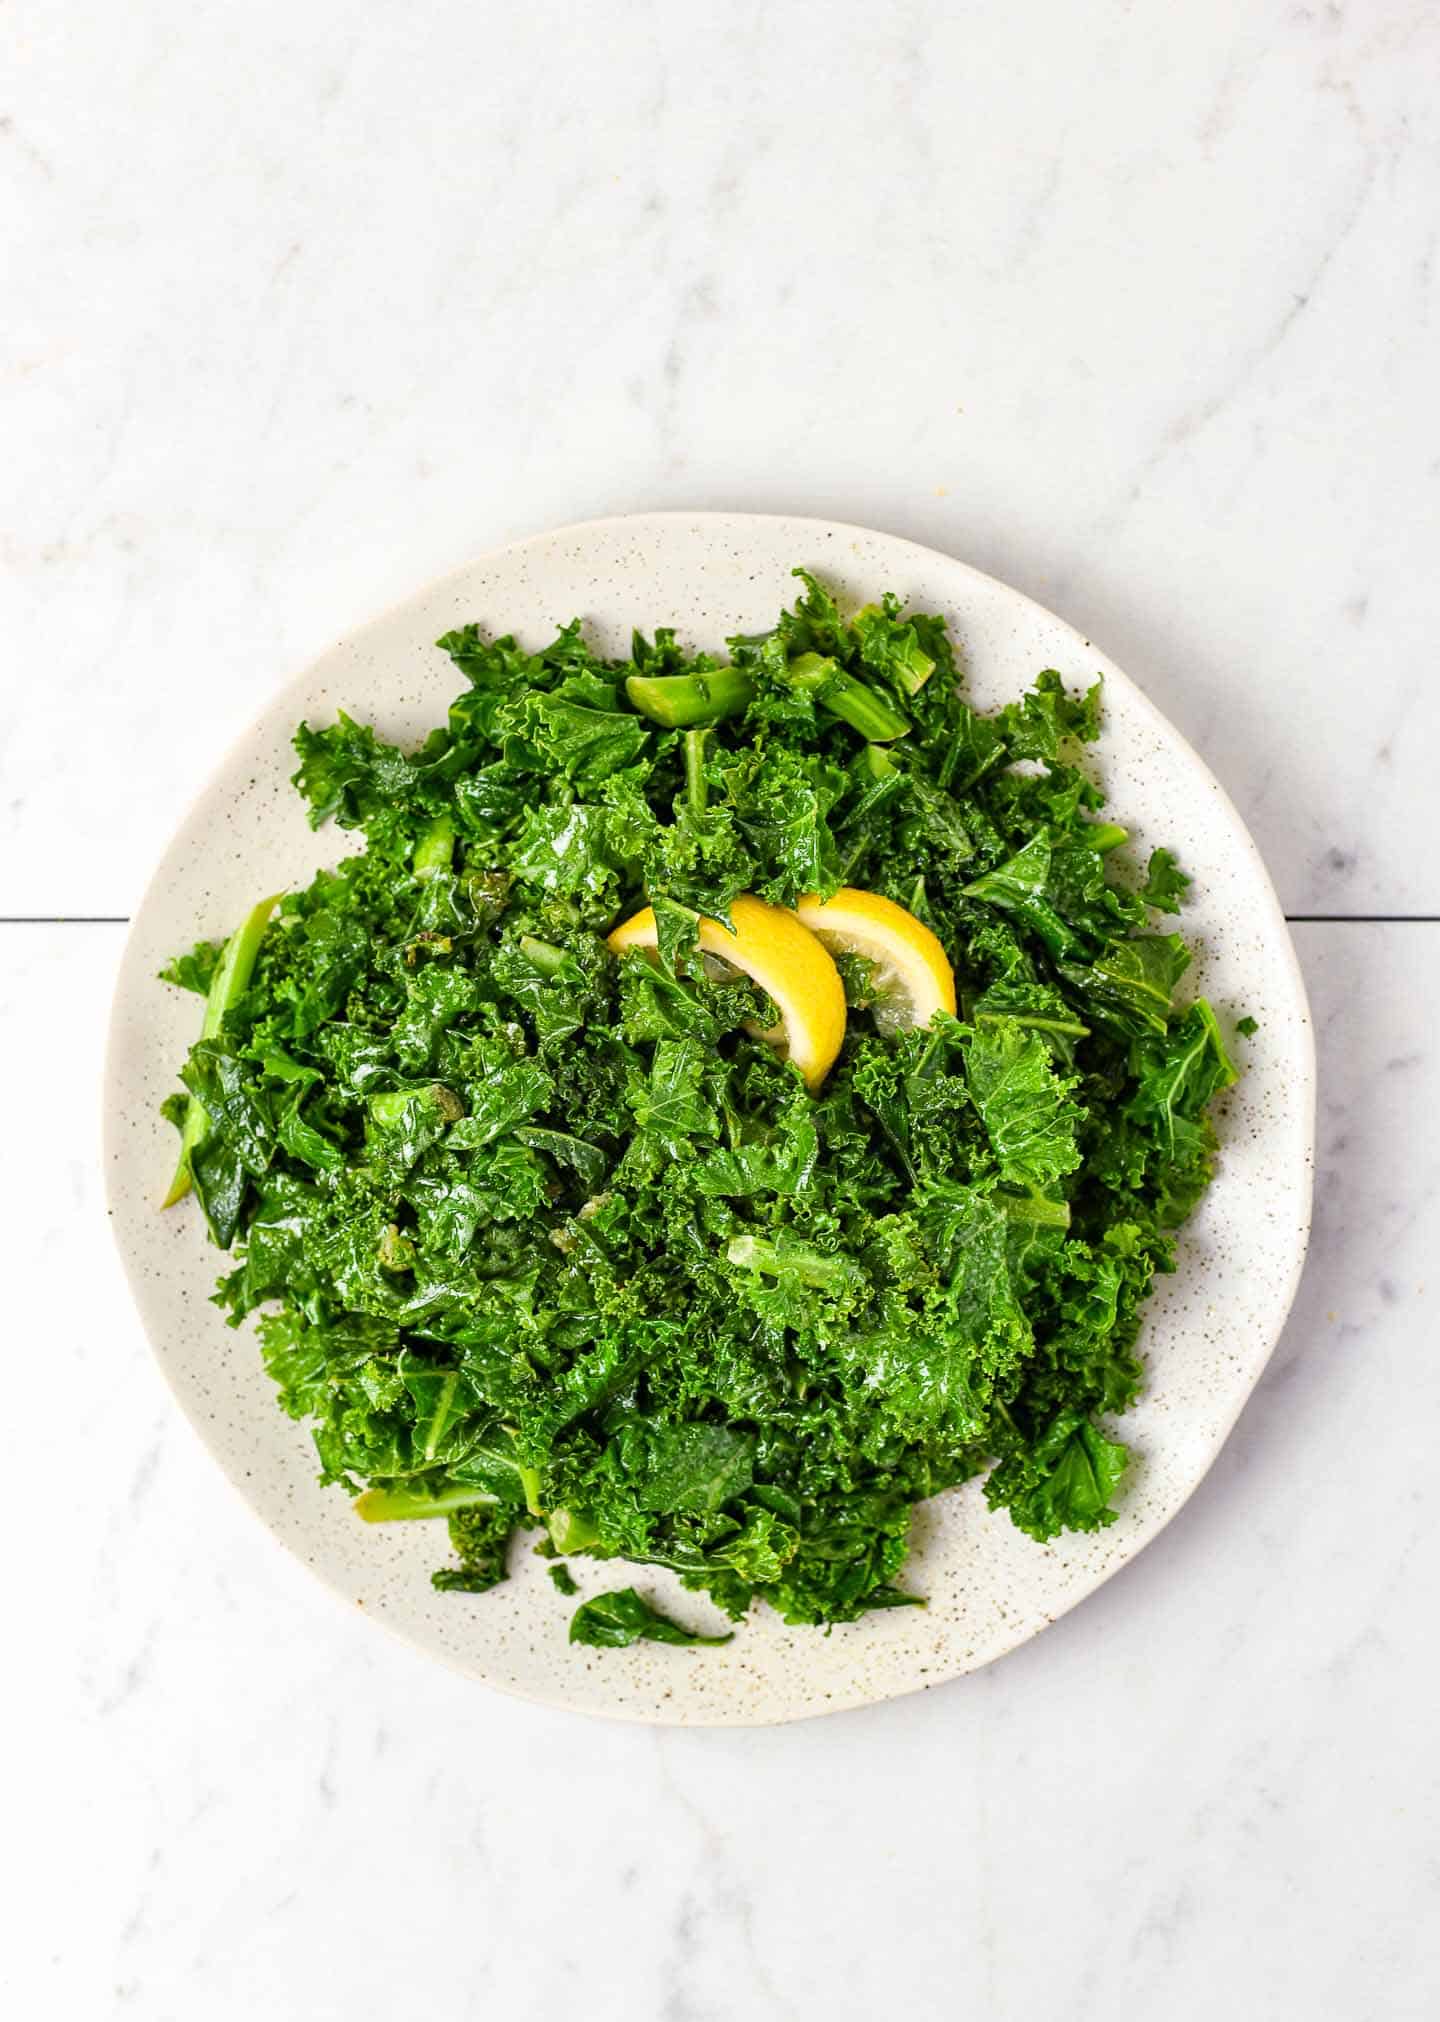 Sauteed kale on plate with lemon wedges.